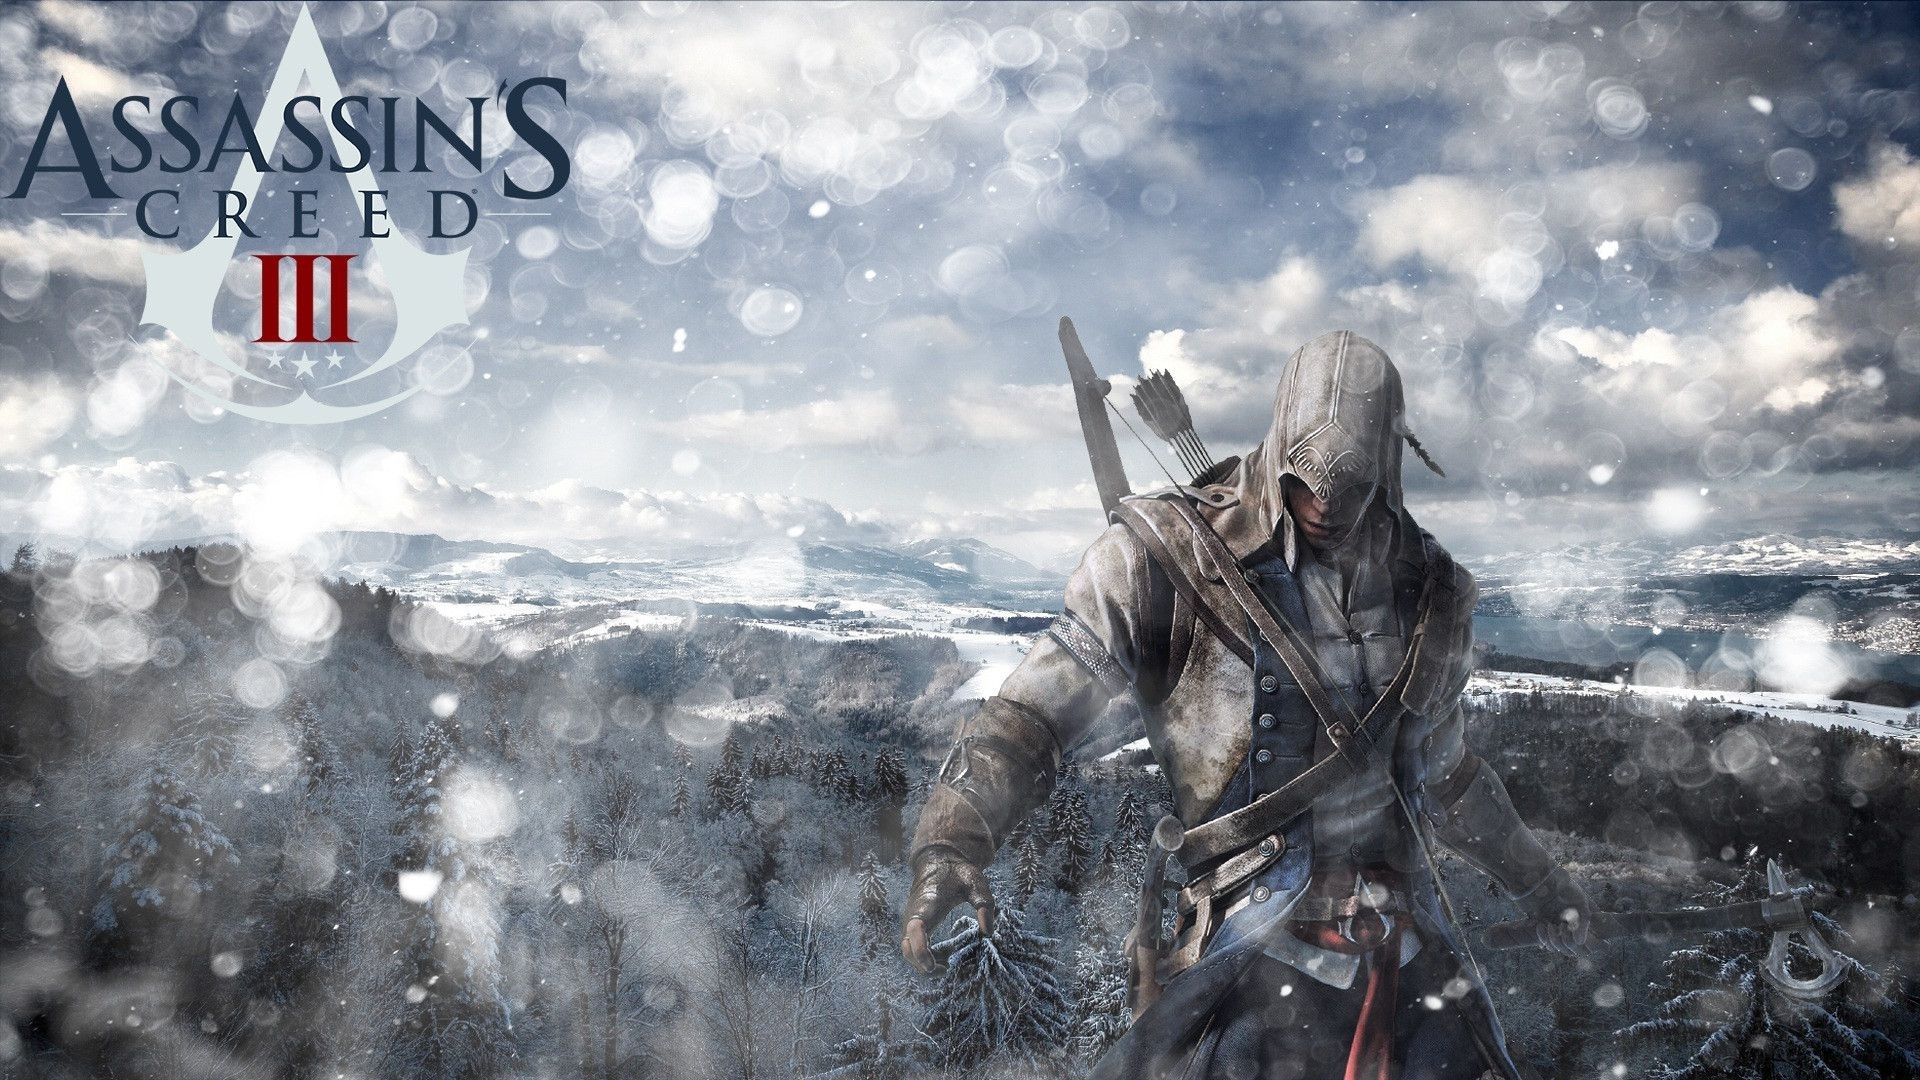 10 Latest Assassins Creed 3 Hd Wallpapers Full Hd 19201080 For Pc